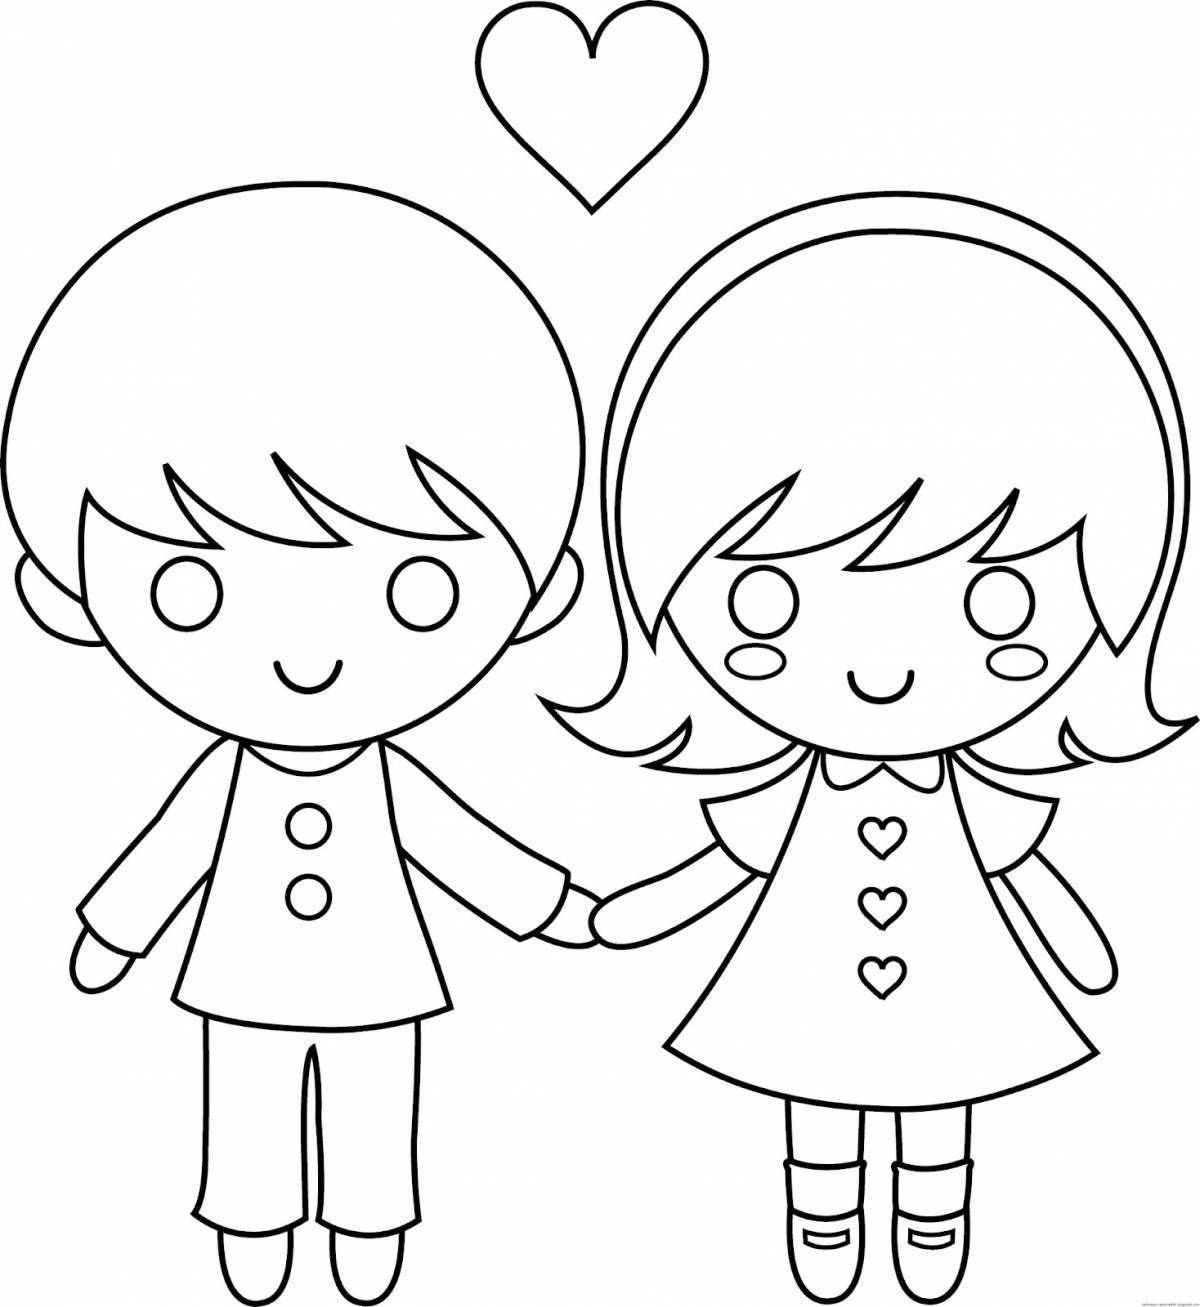 Colourful coloring pages for boys and girls